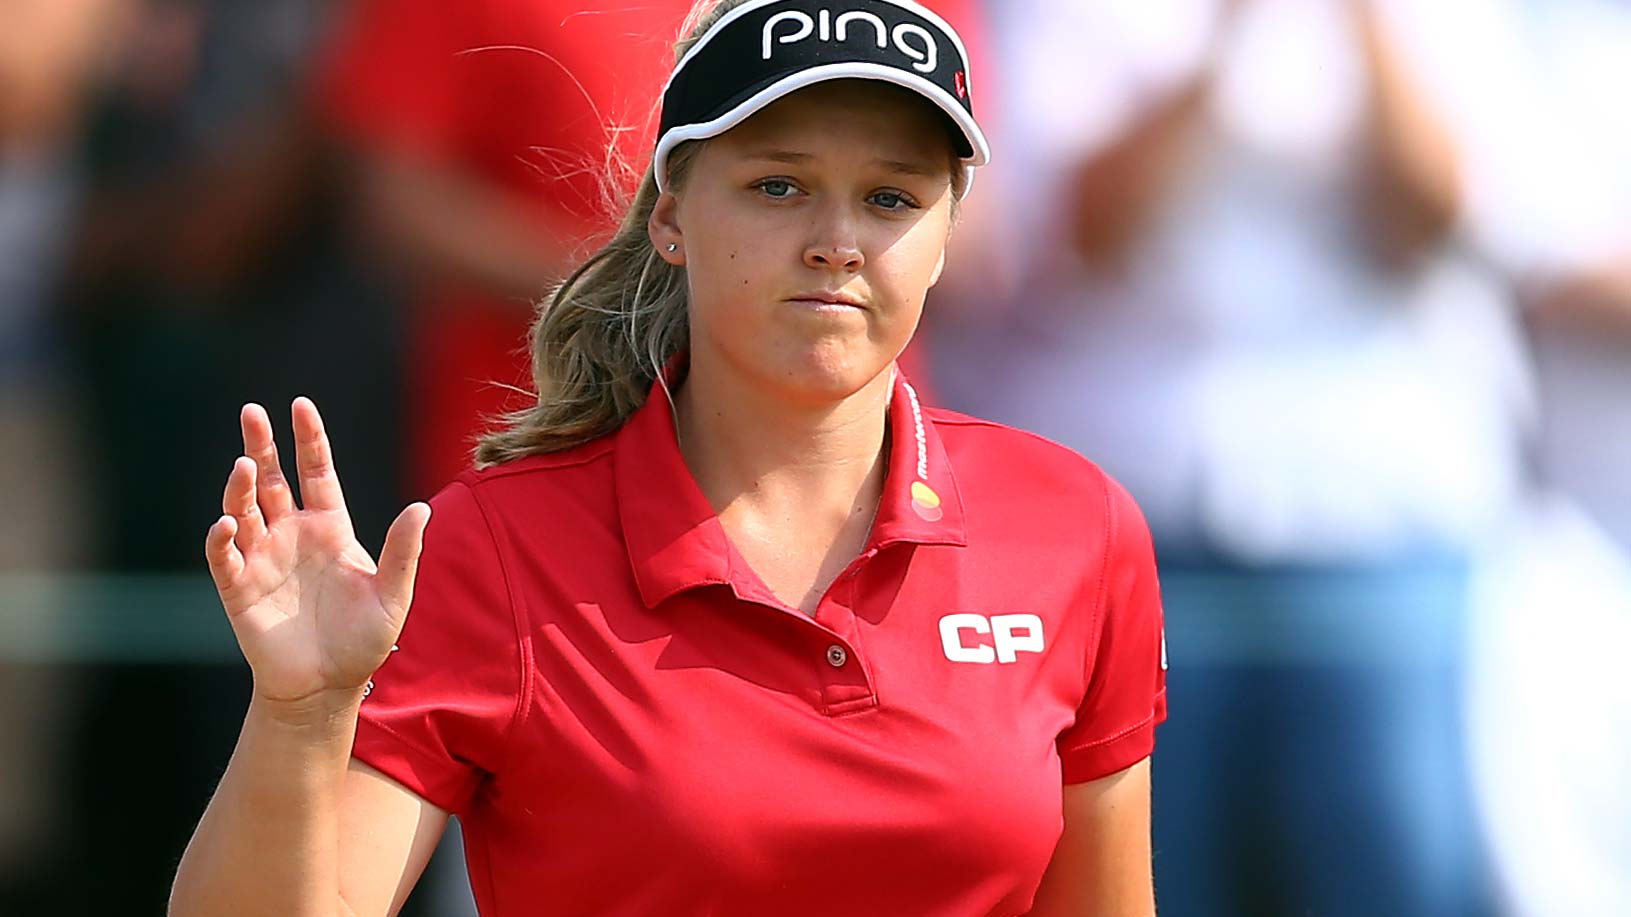 Brooke Henderson of Canada reacts to fans applause on the 17th hole during the second round of the CP Womens Open